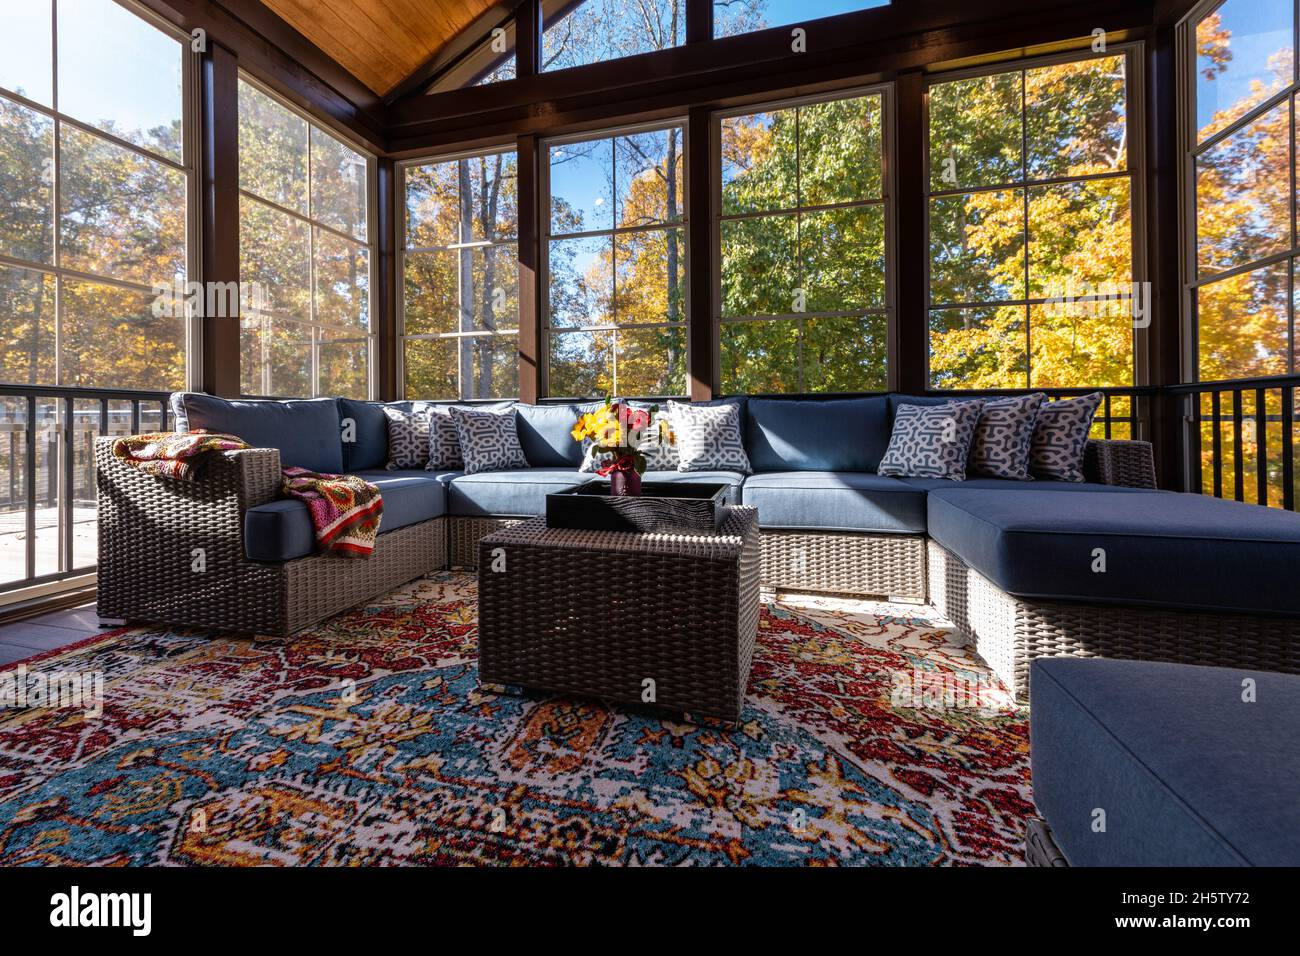 Cozy screened porch with contemporary furniture and flower bouquet in a vase, autumn leaves and woods in the background. Stock Photo